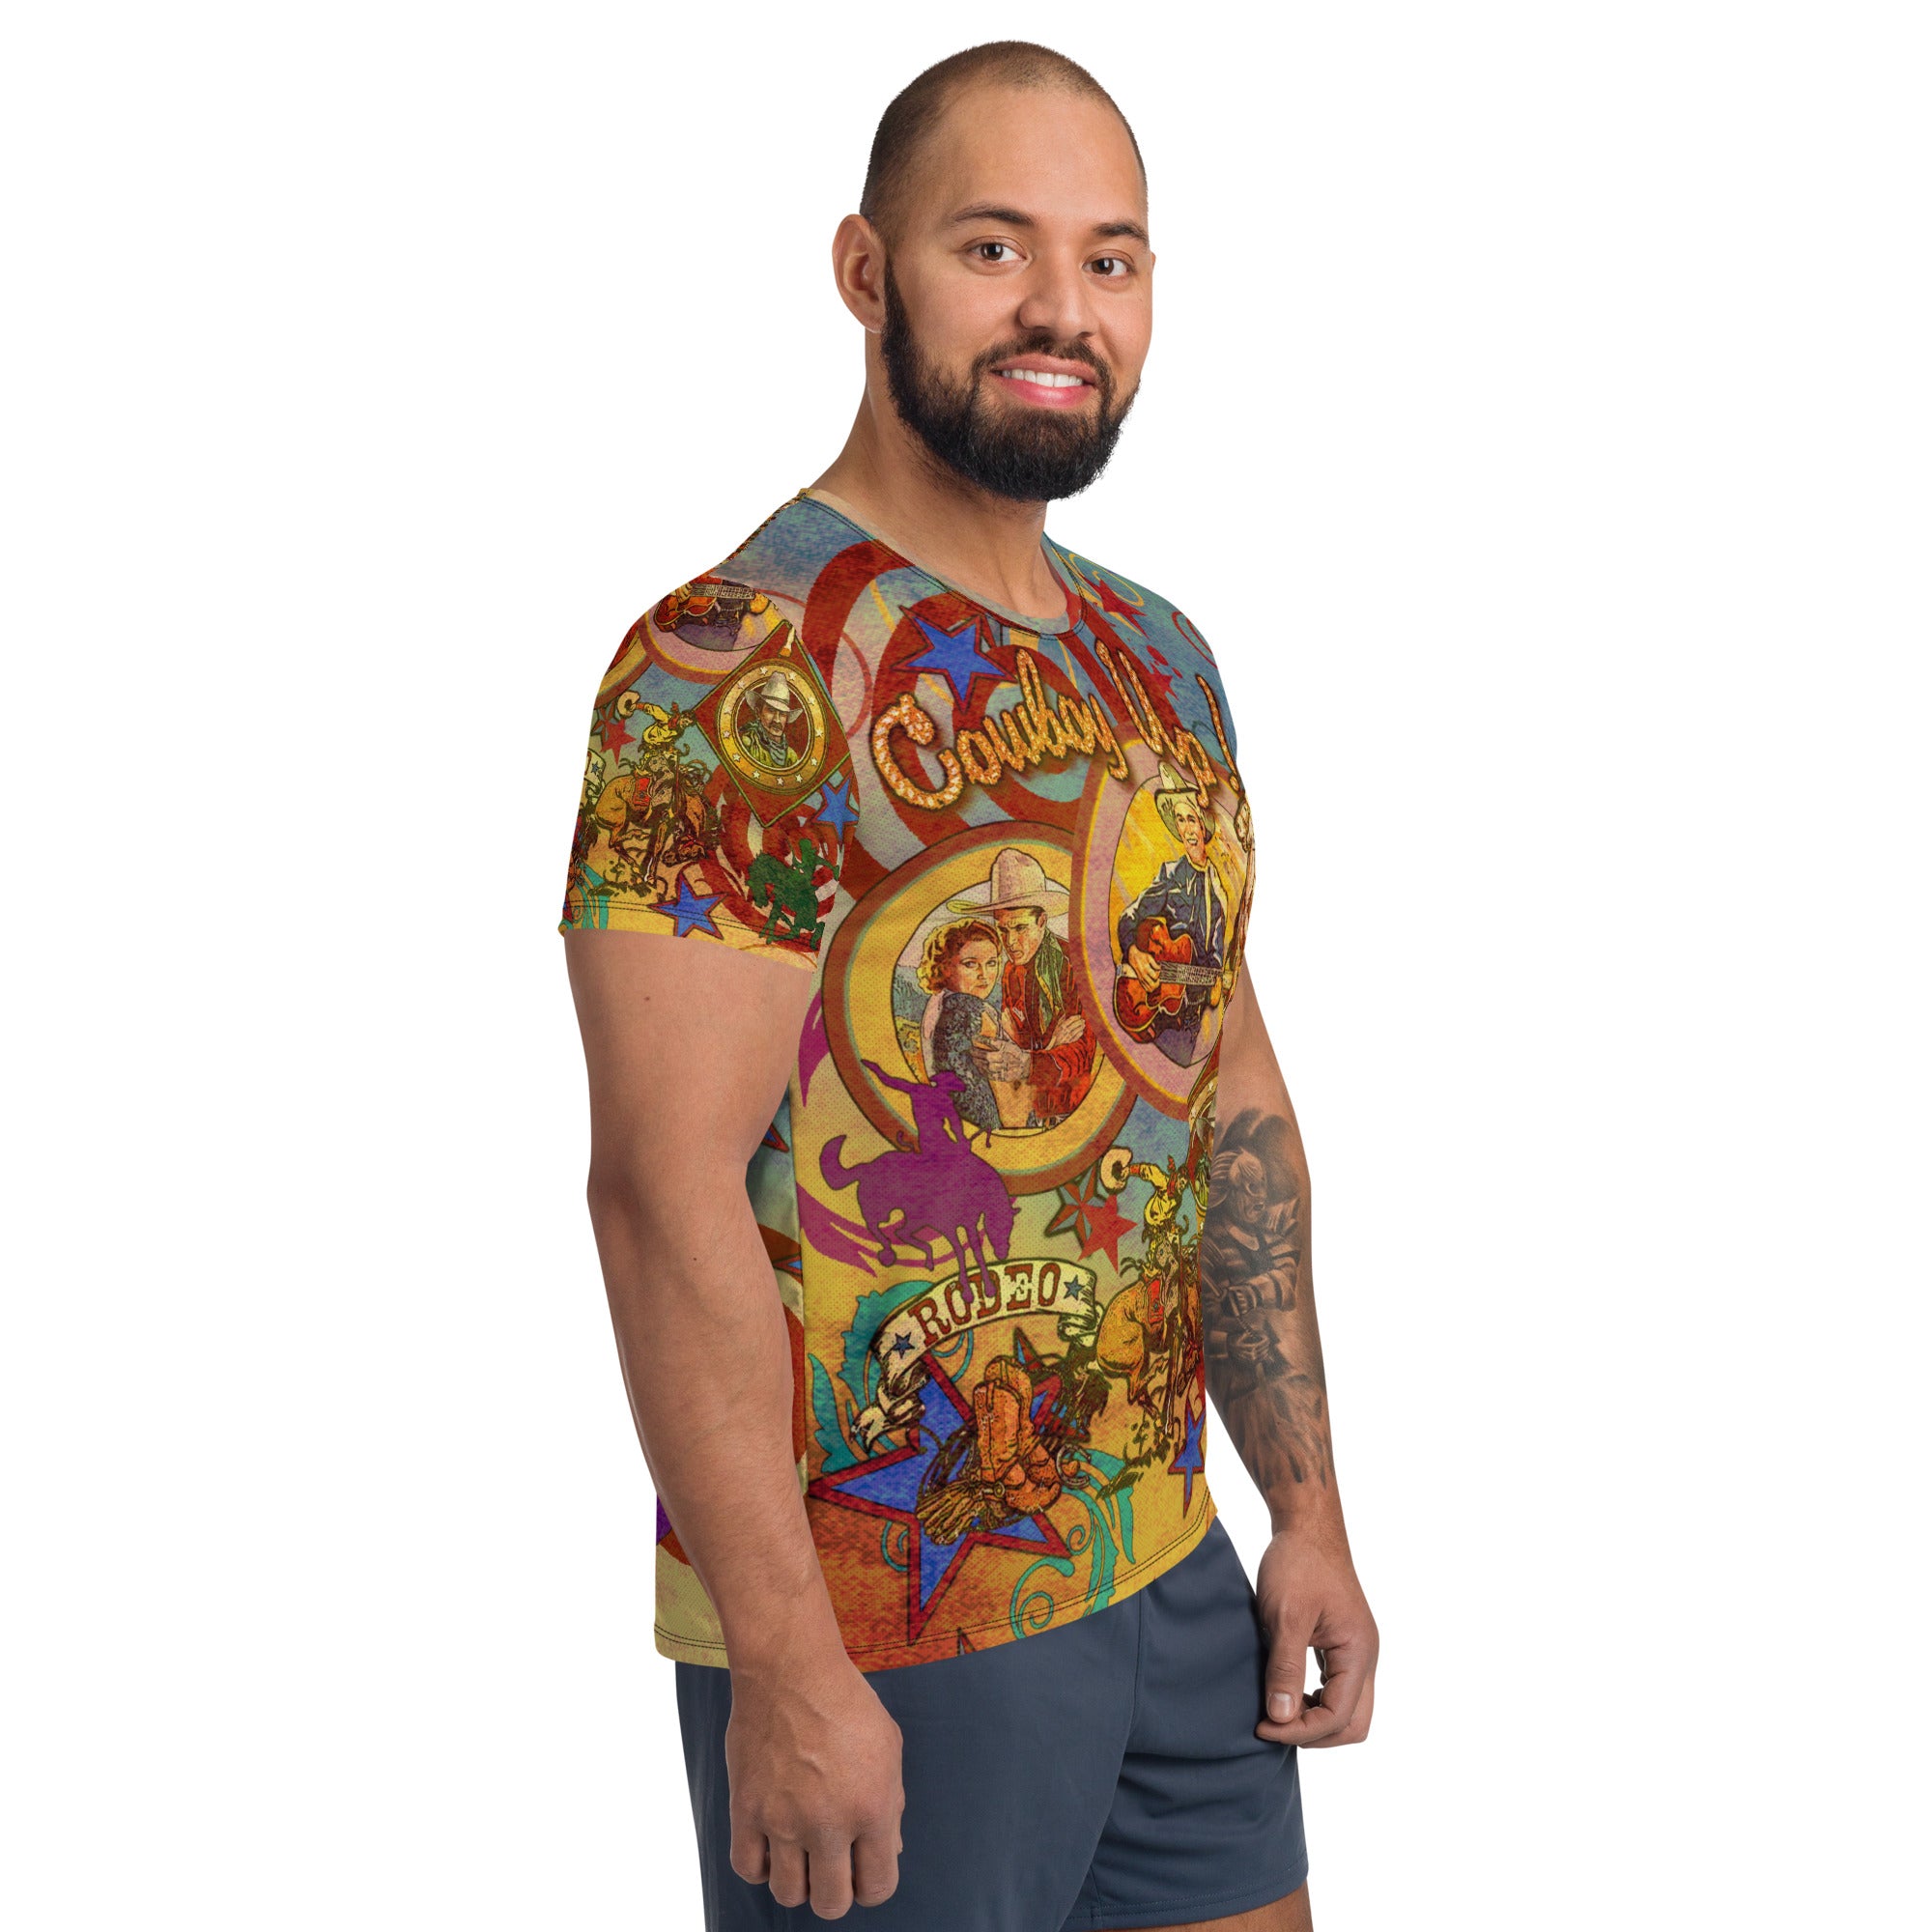 "COWBOY TATTOO" ATHLETIC TEE FOR MEN